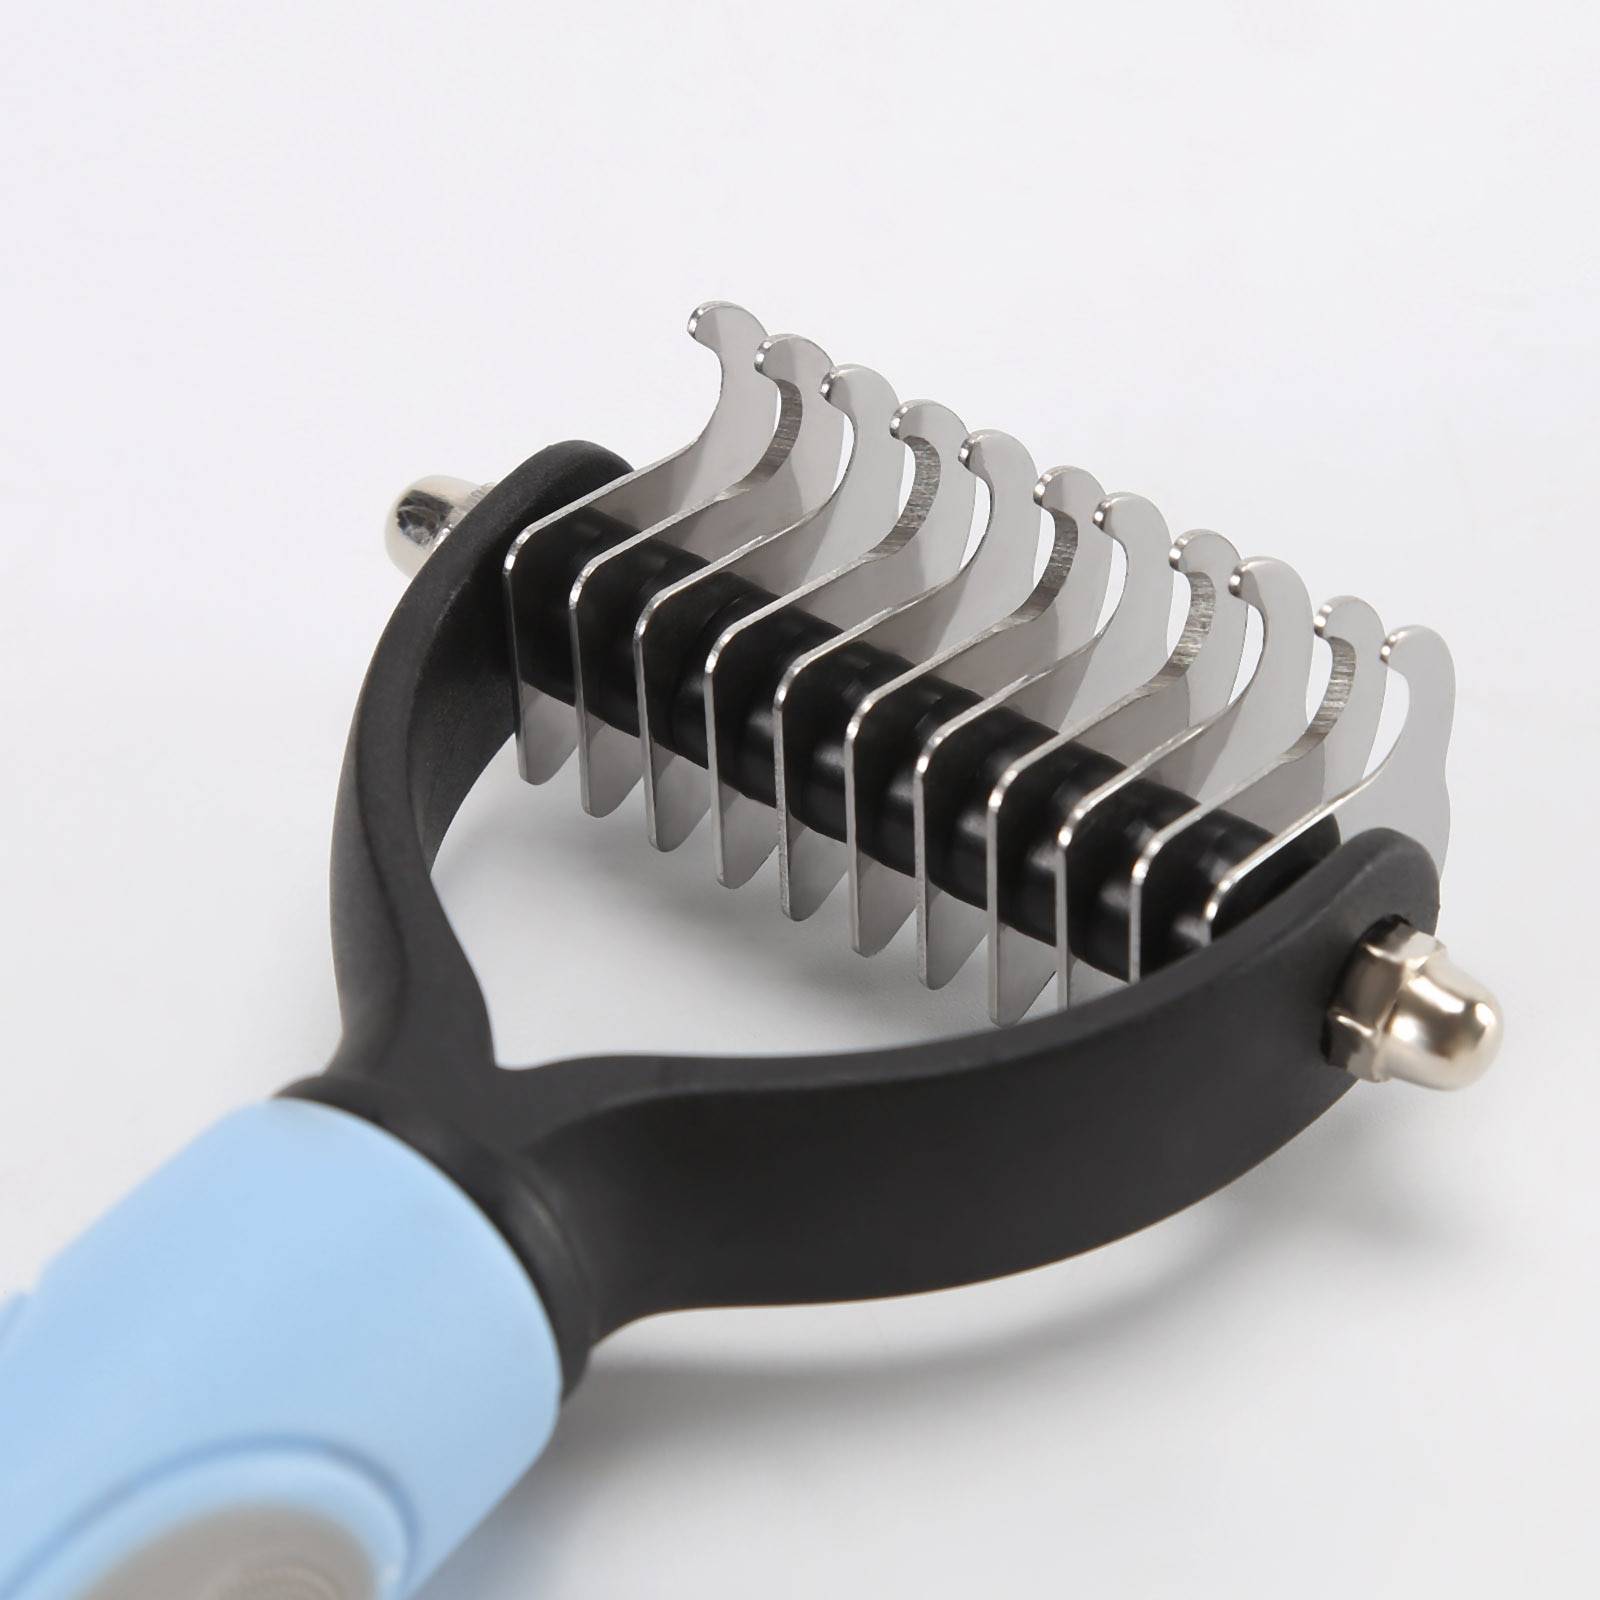 Detangling Hair Comb for Dogs